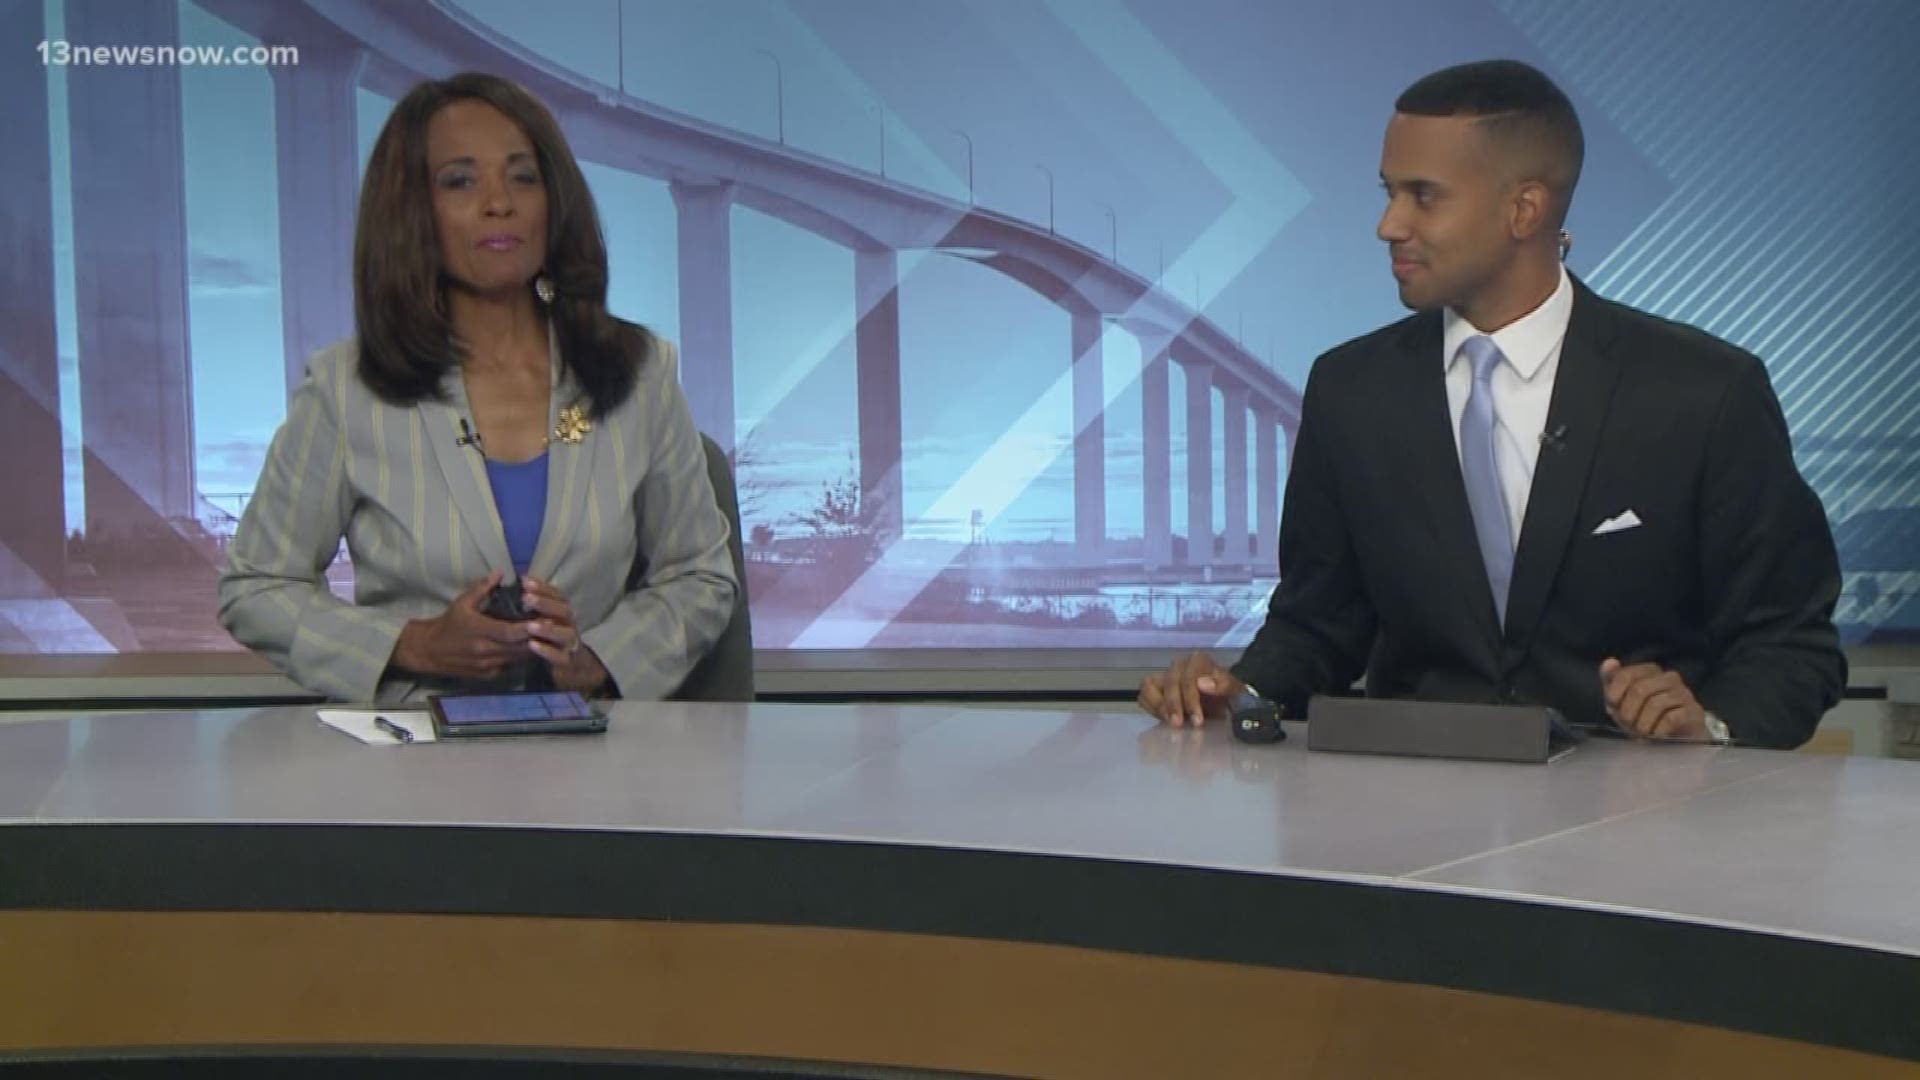 Top Stories from 13News Now at 4 p.m. with Regina Mobley and Steven Graves